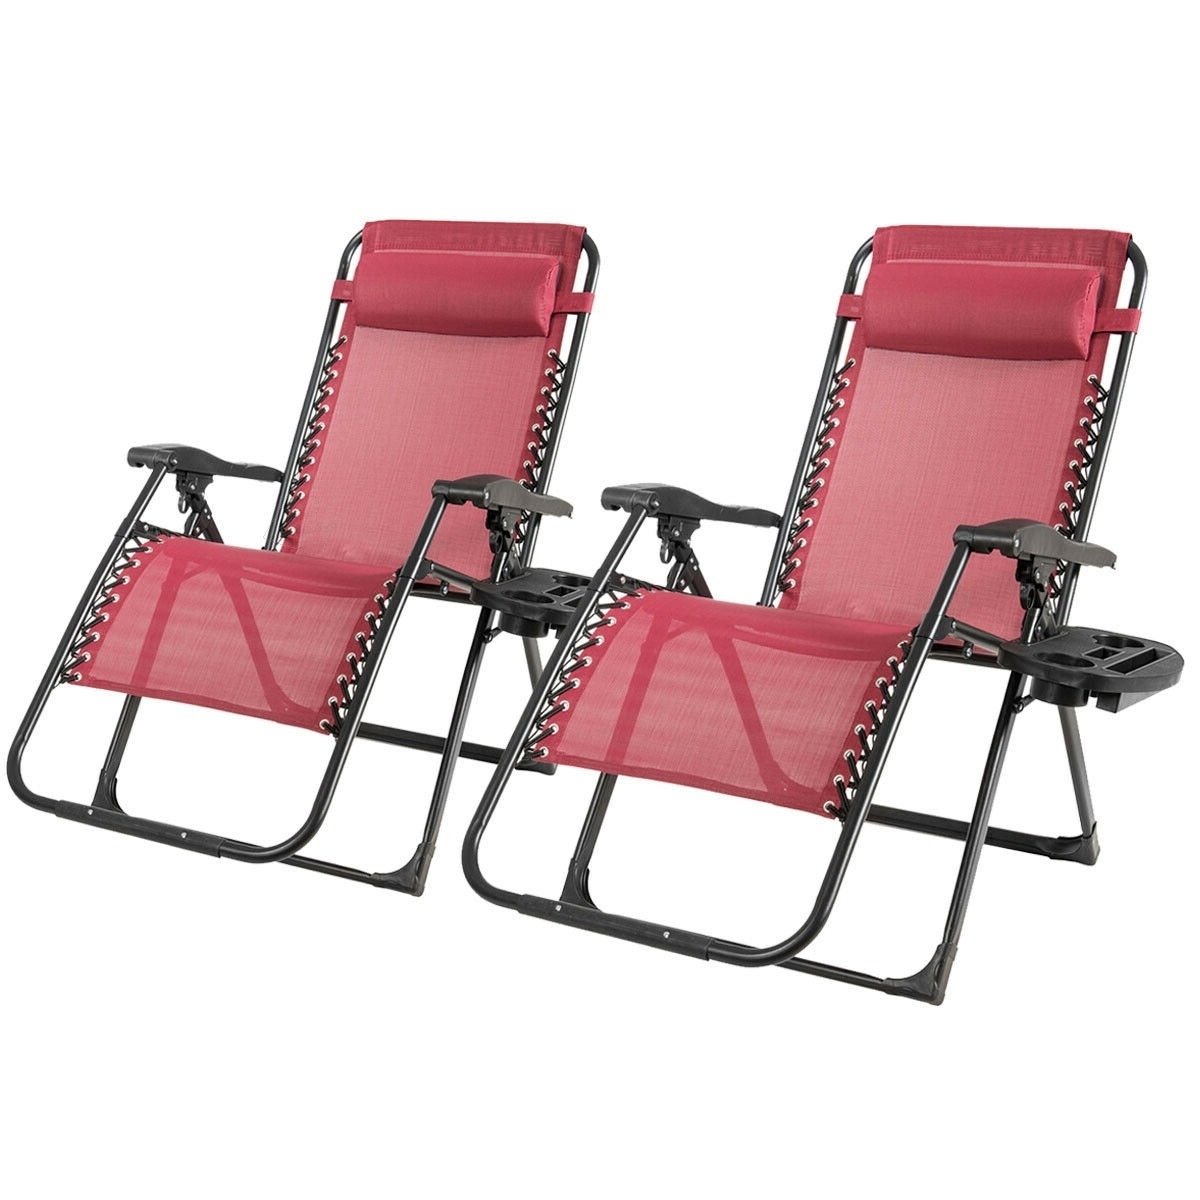 2PCS Folding Zero Gravity Lounge Chair Recliner W/ Cup Holder Pillow - Wine Red